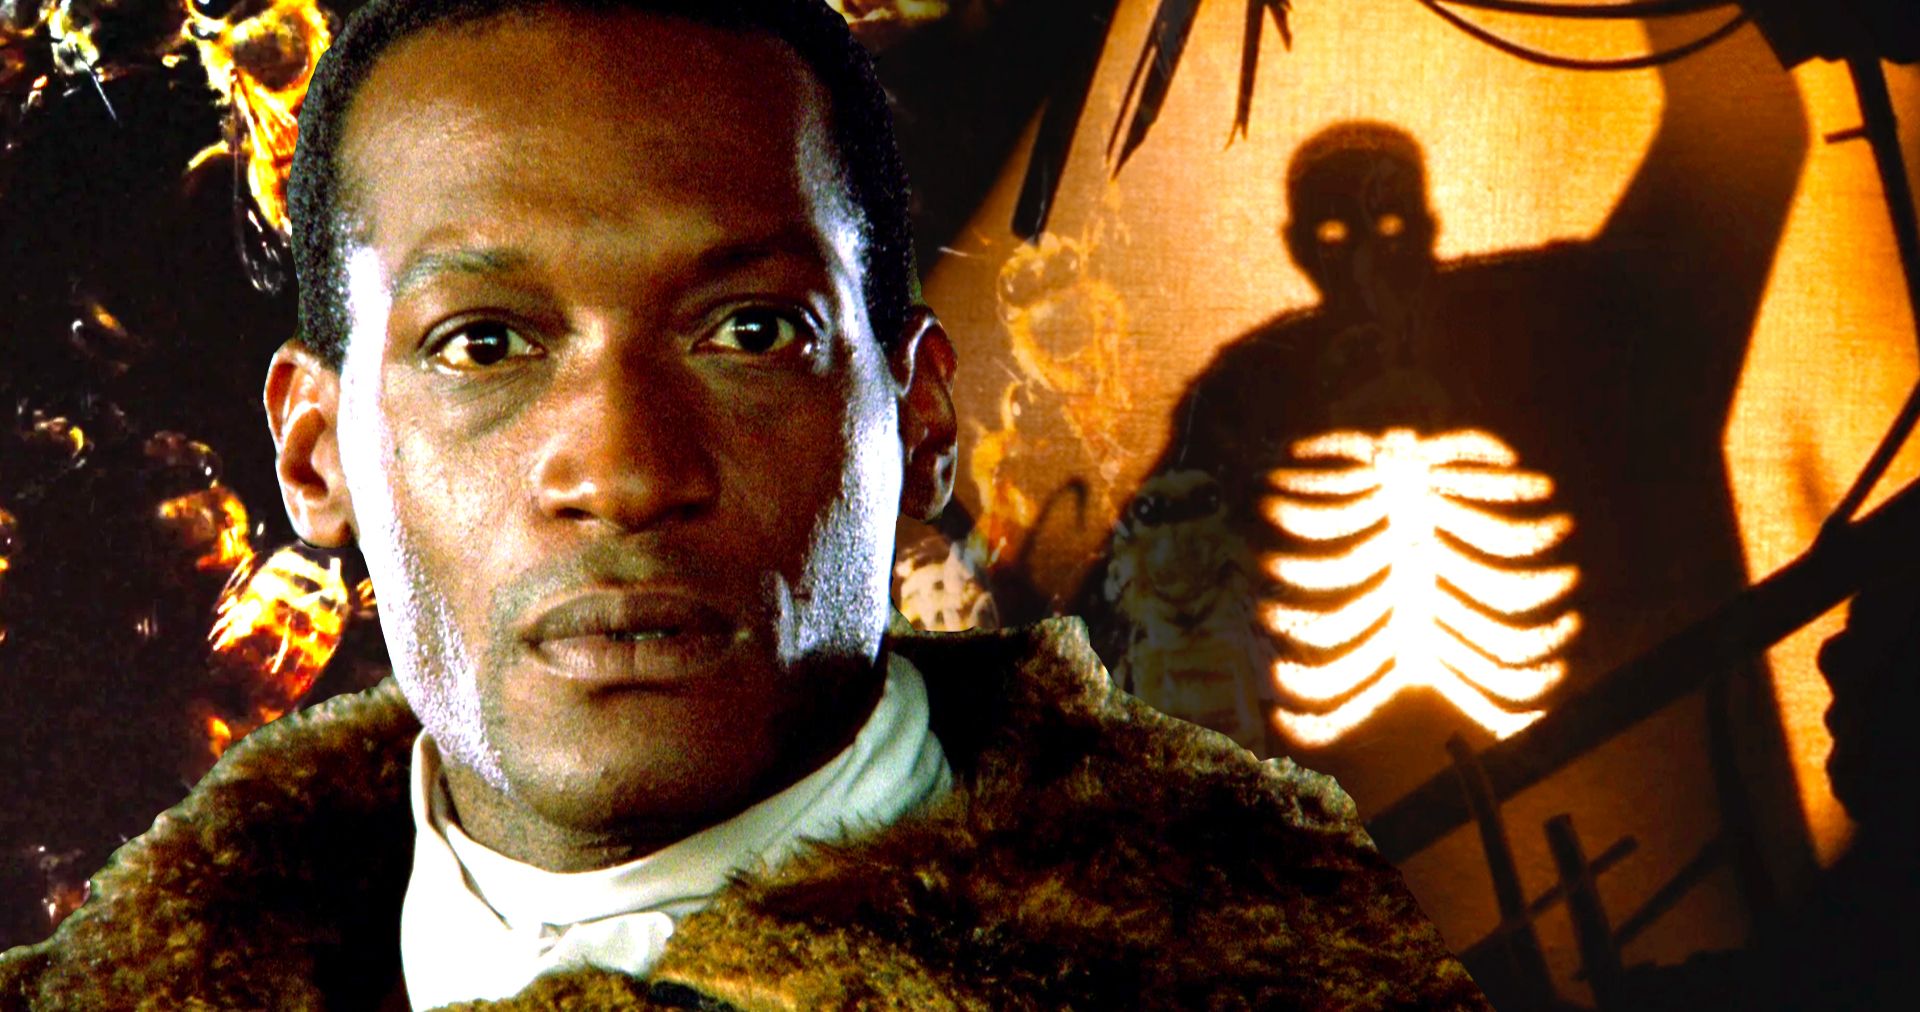 How the New Candyman Builds on Crucial Connections to the Original Film